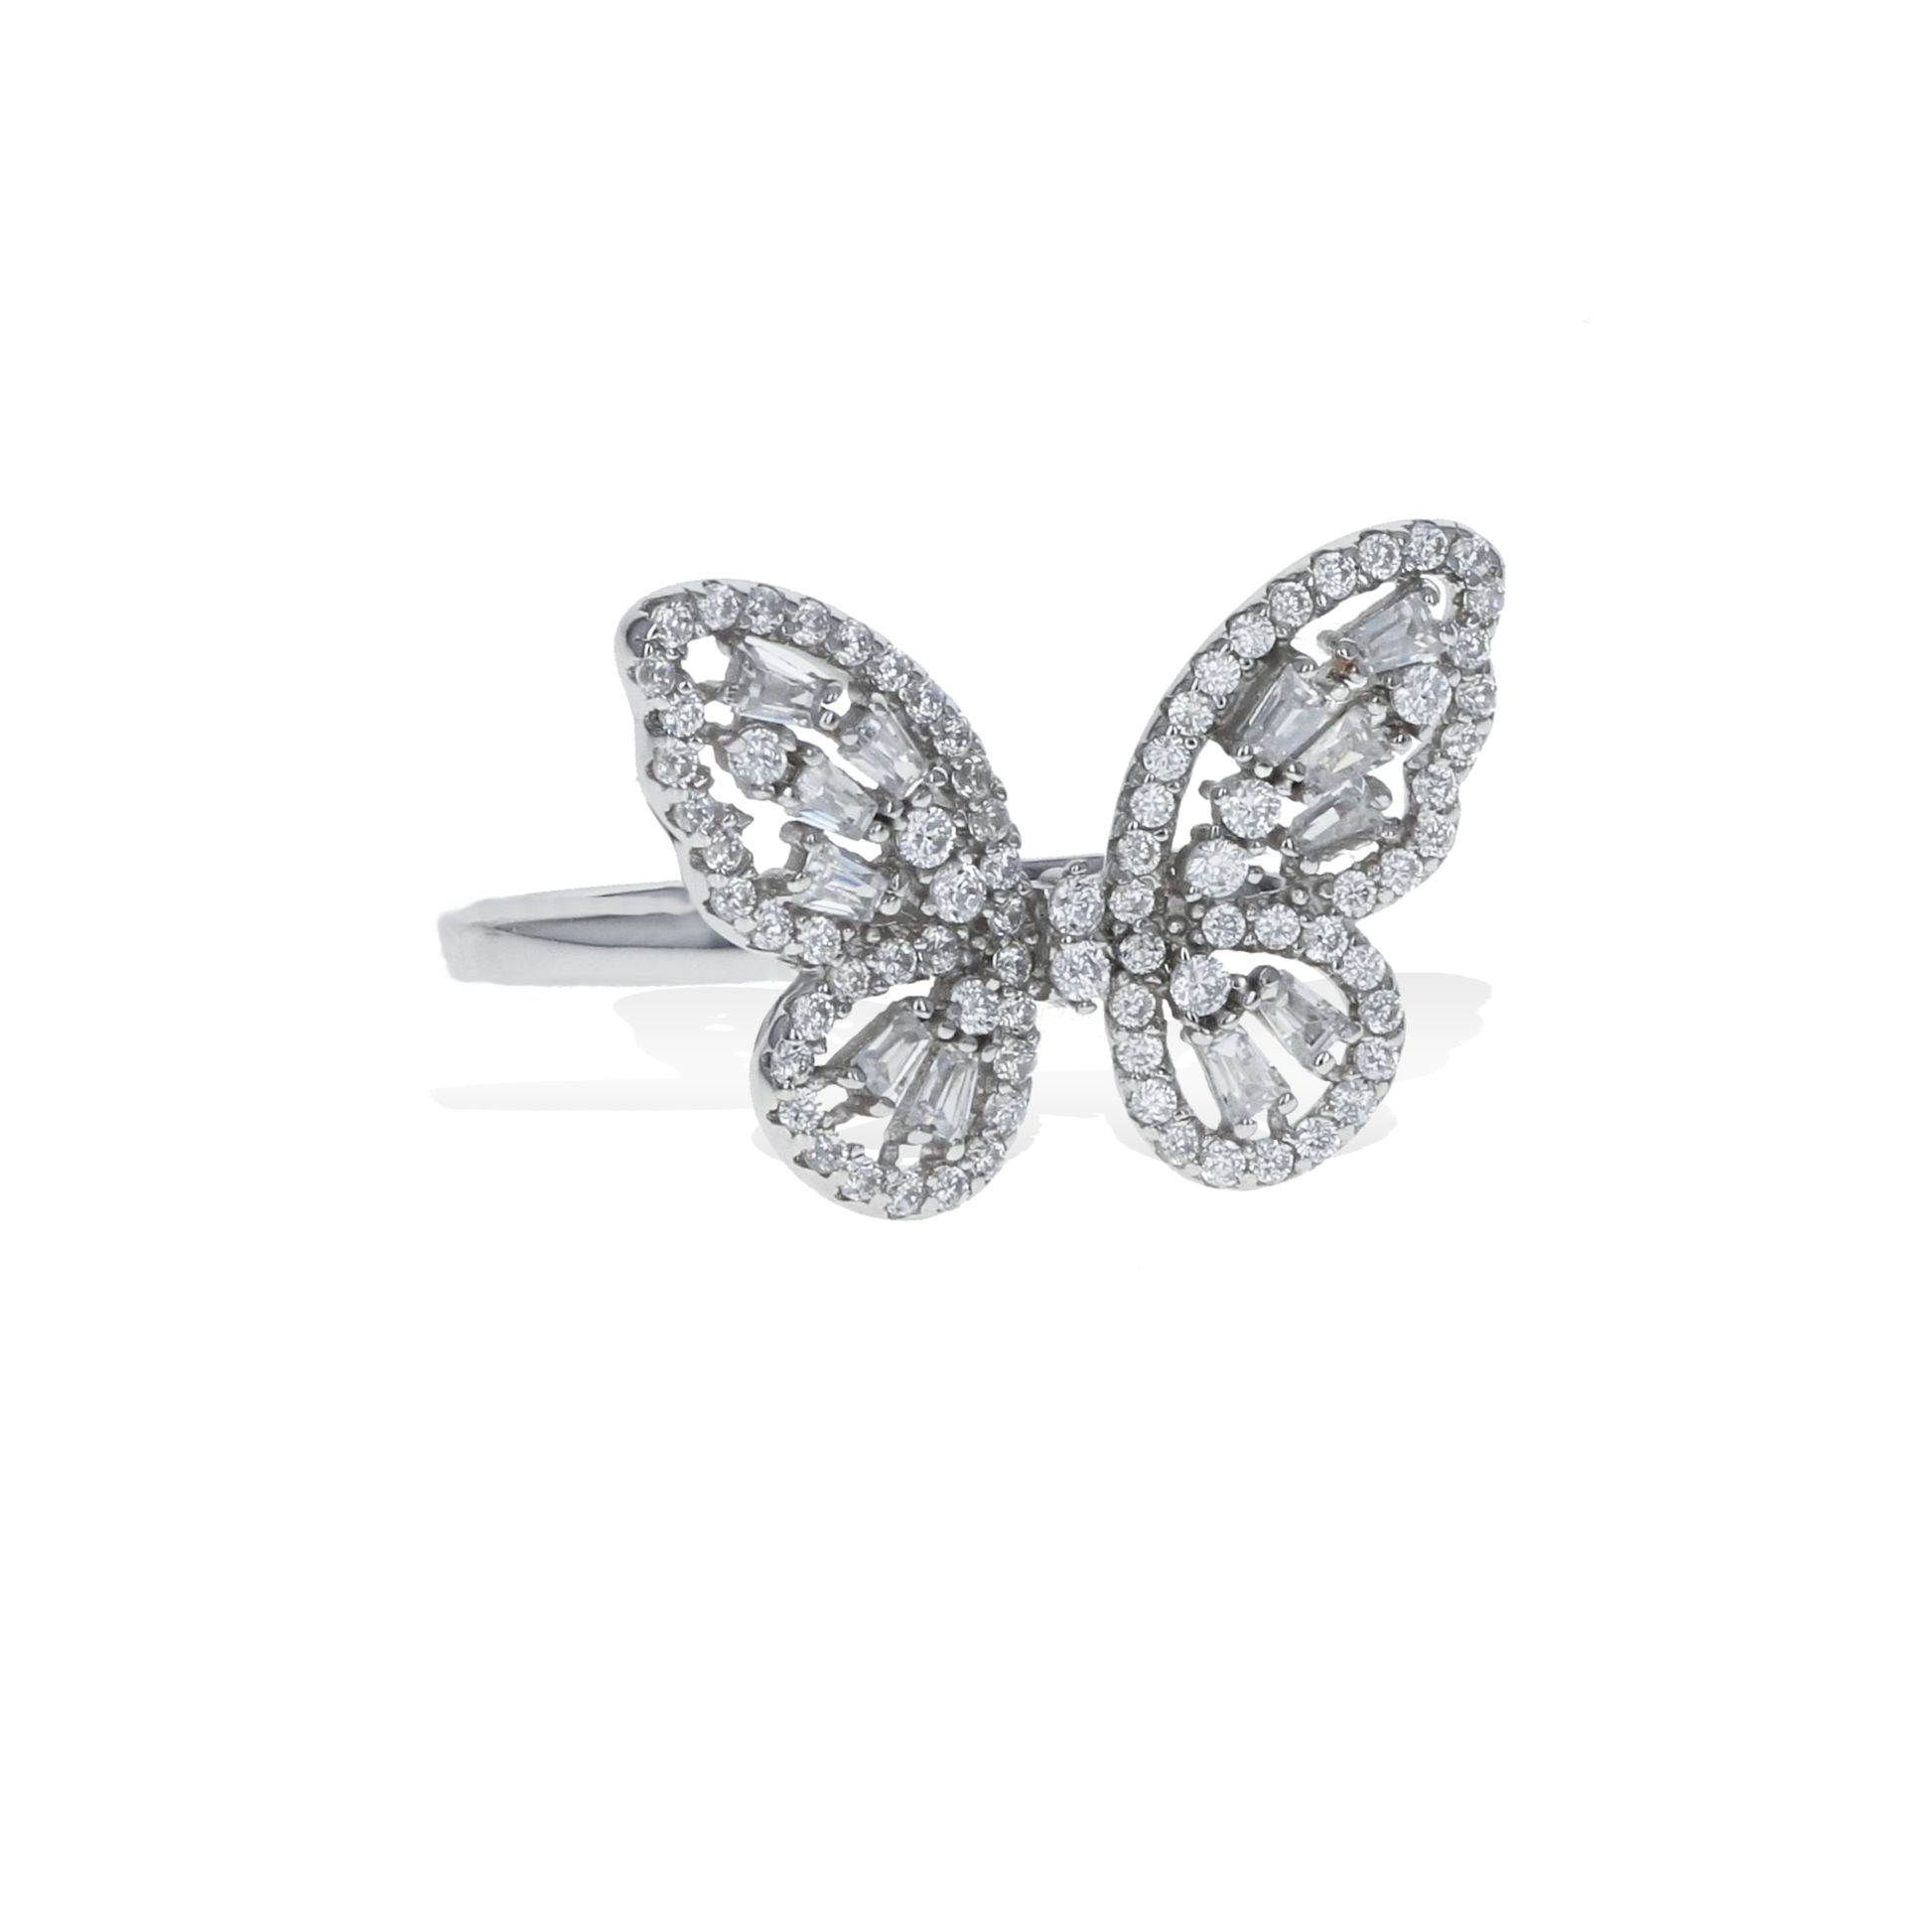 Sterling Silver Butterfly CZ Ring from Alexandra Marks Jewelry